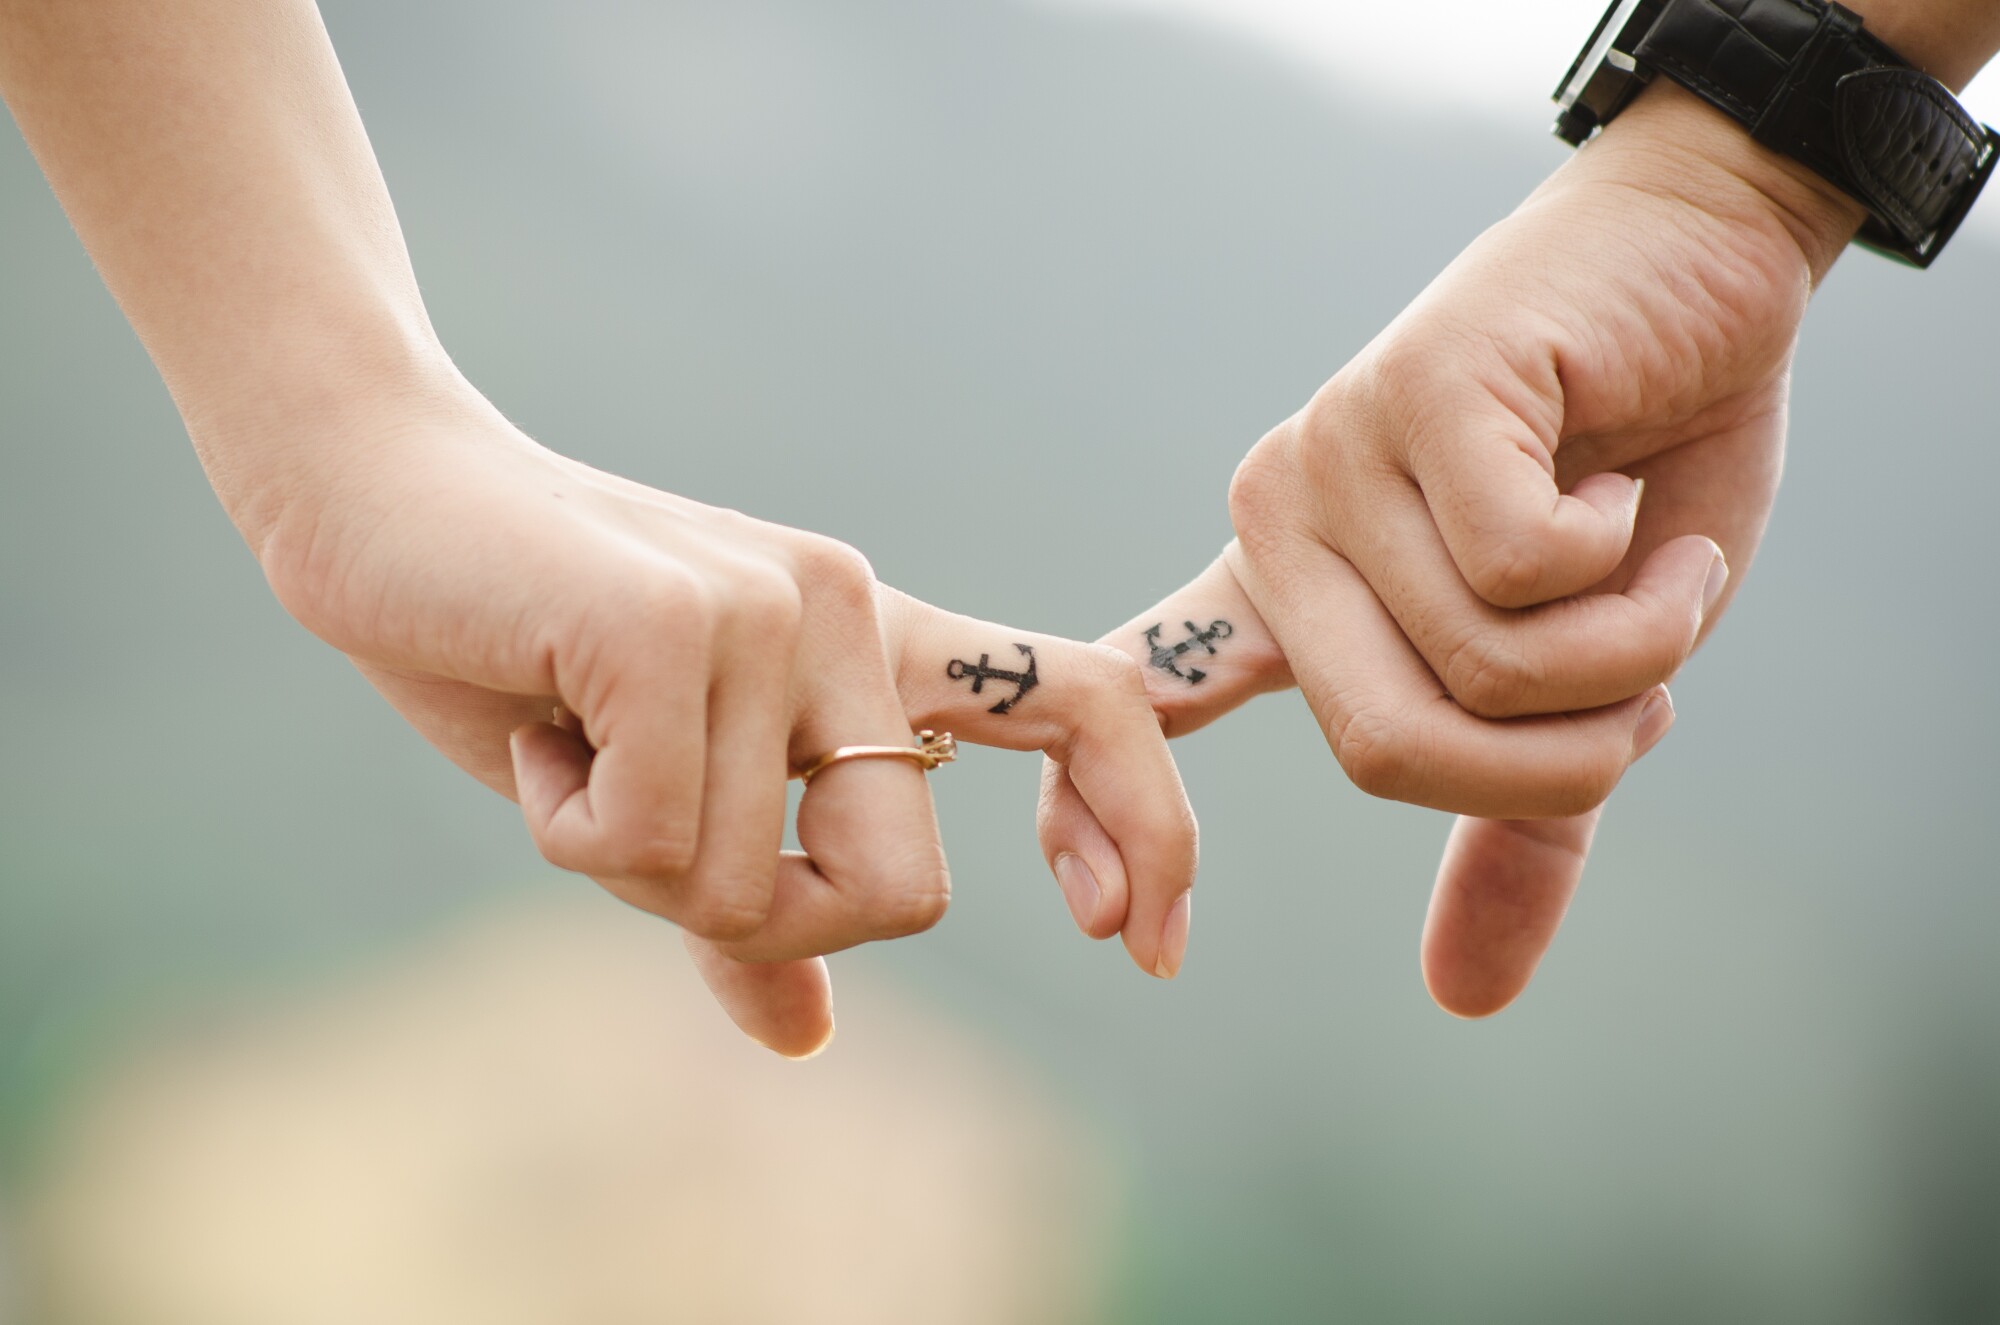 Matching Couples Tattoos Inspo because #relationshipmatters